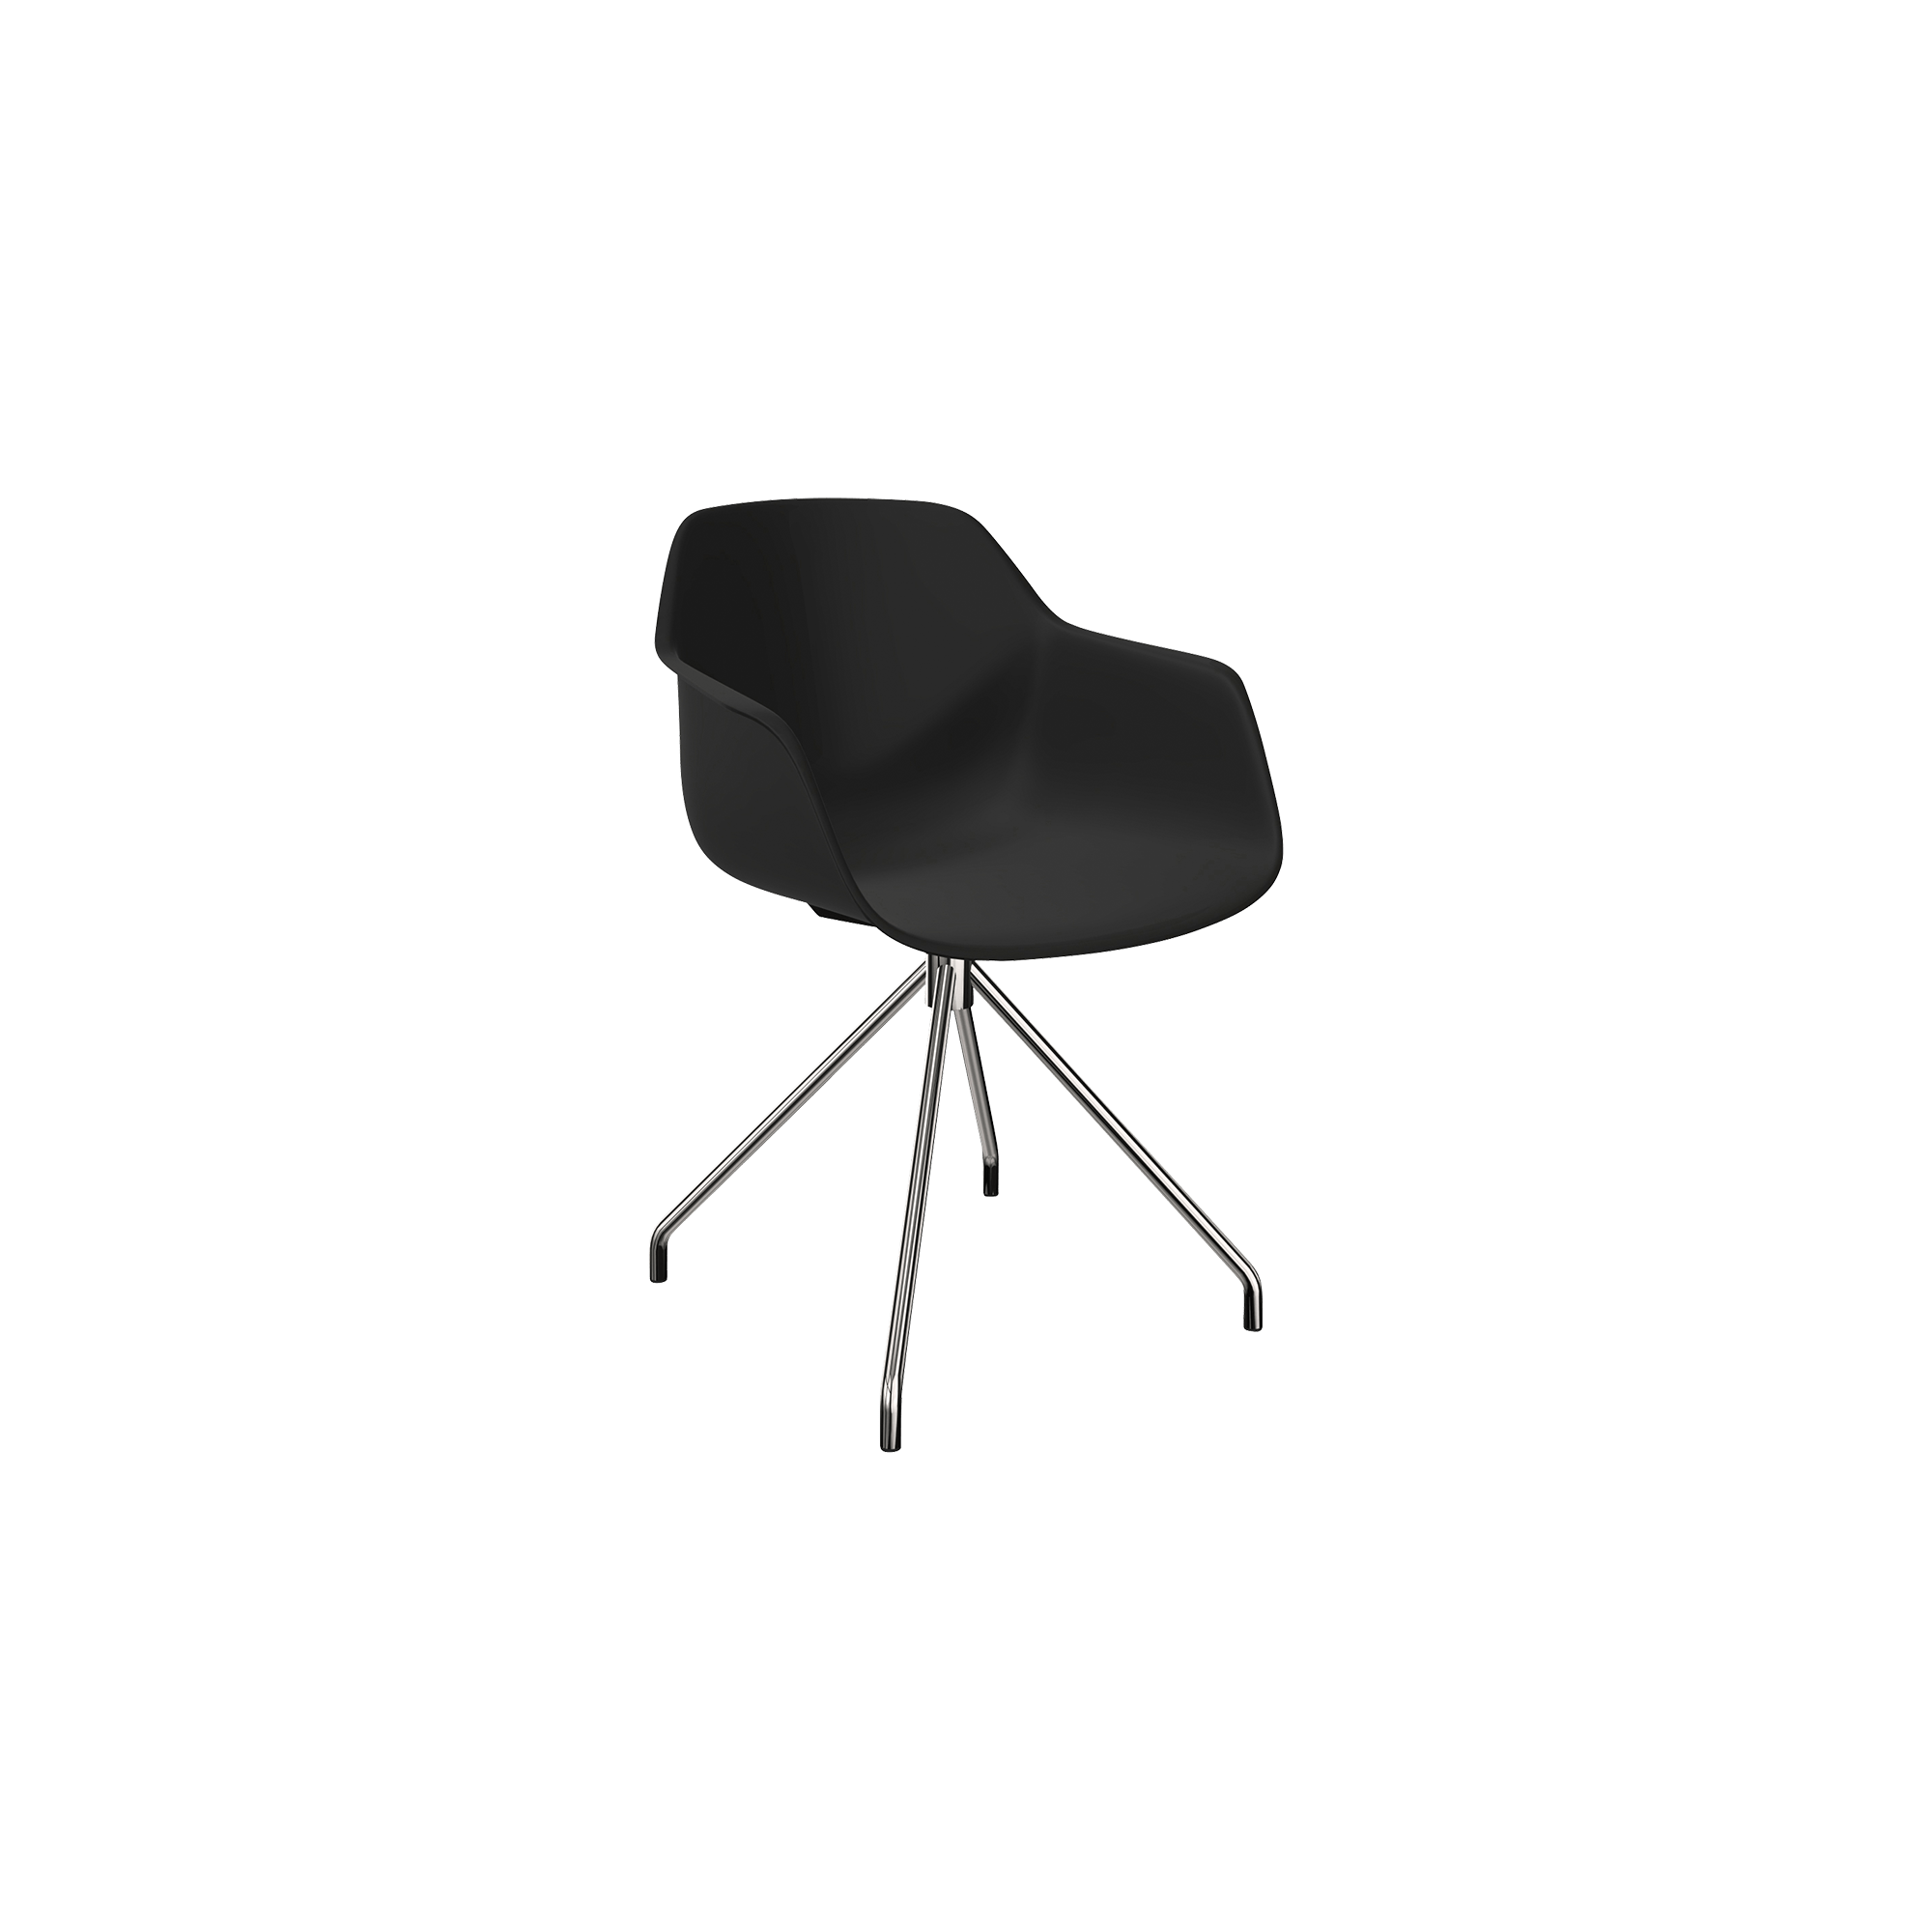 black chair with metal legs